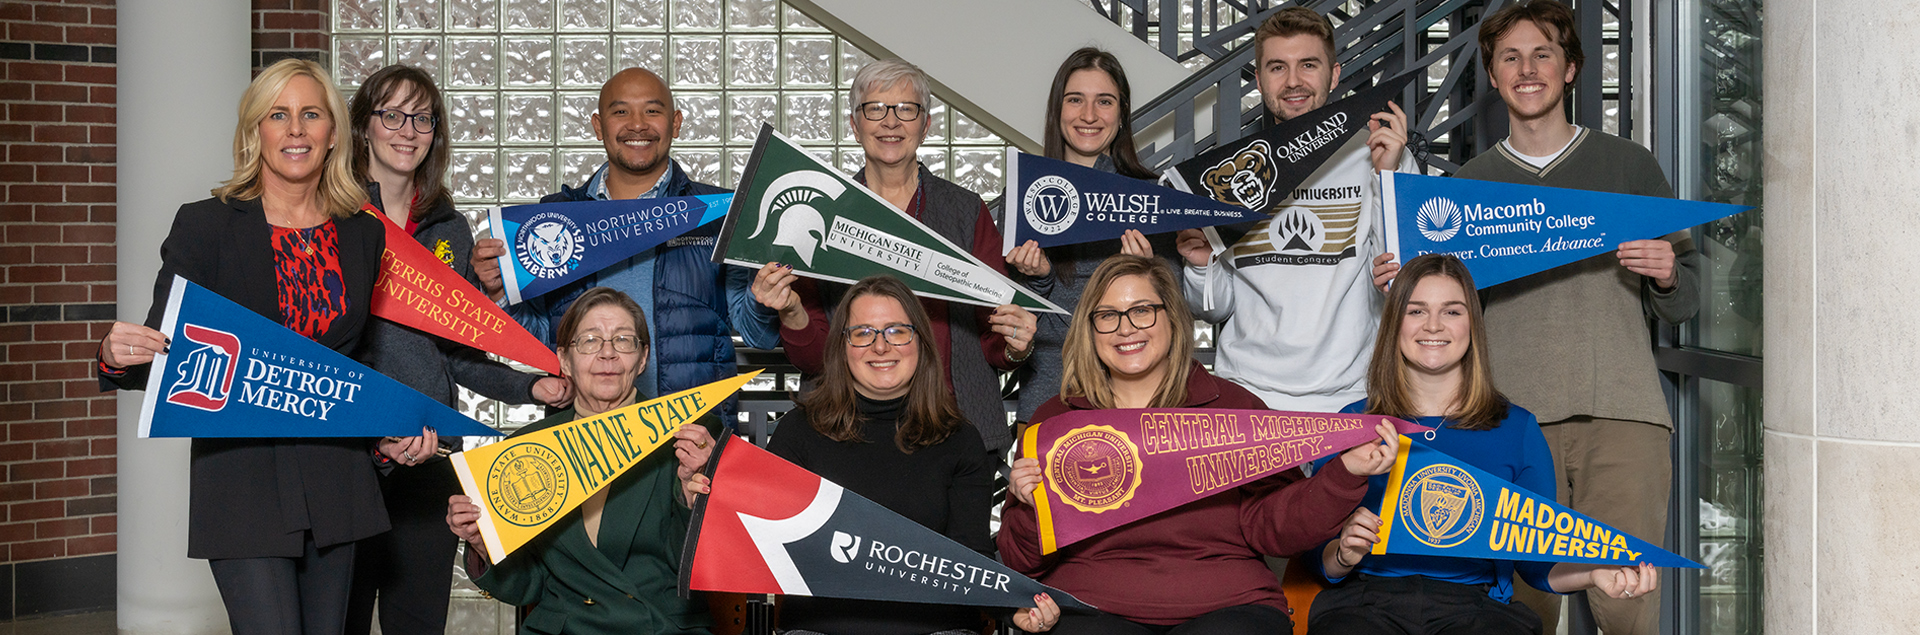 Connect with as many as 60 colleges and universities at the College and Transfer Fair.